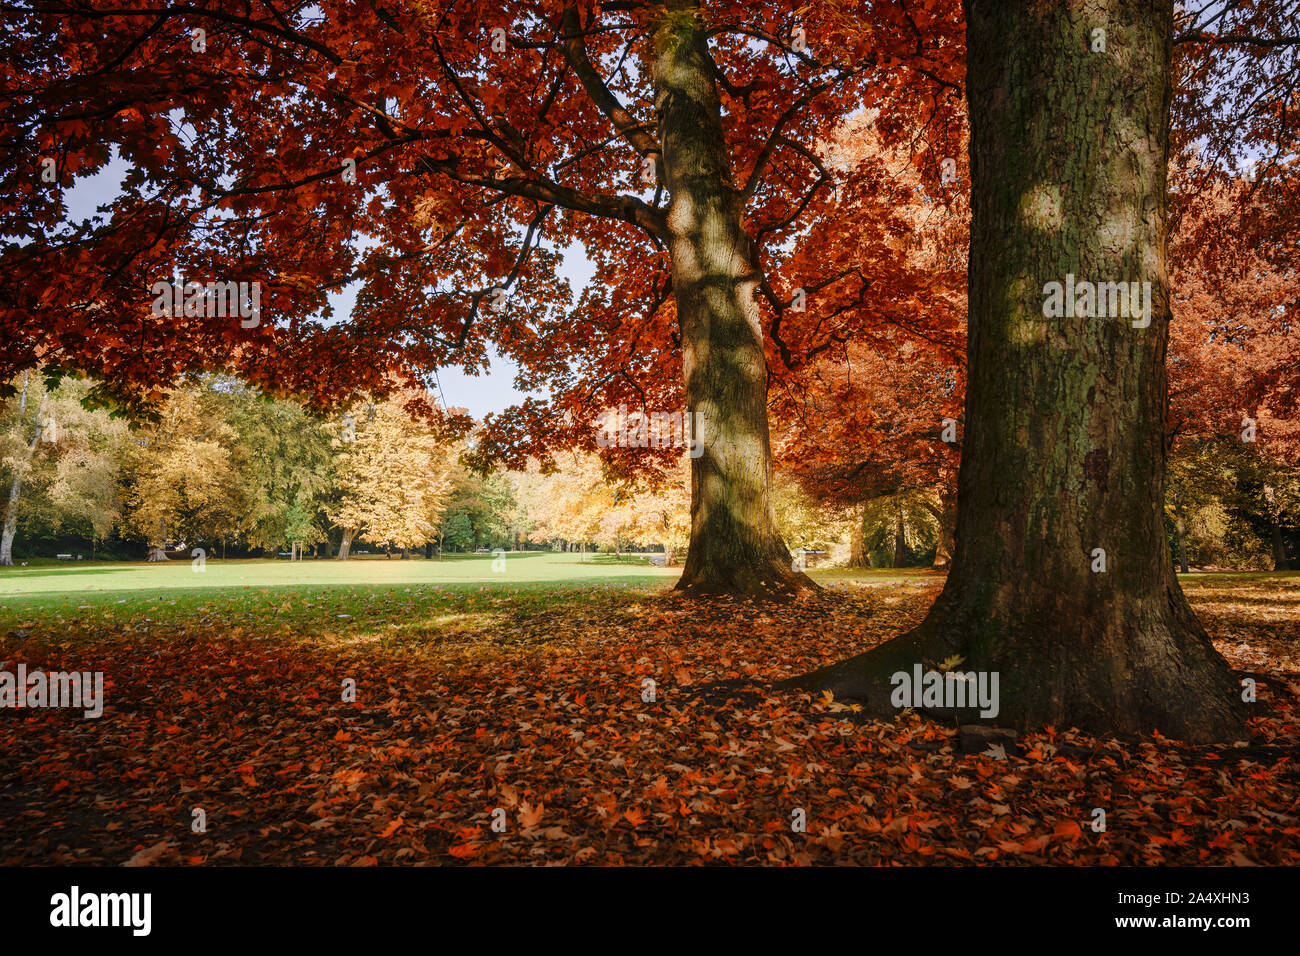 autumn colors on old trees with red and golden foliage in a park, seasonal landscape, selected focus Stock Photo